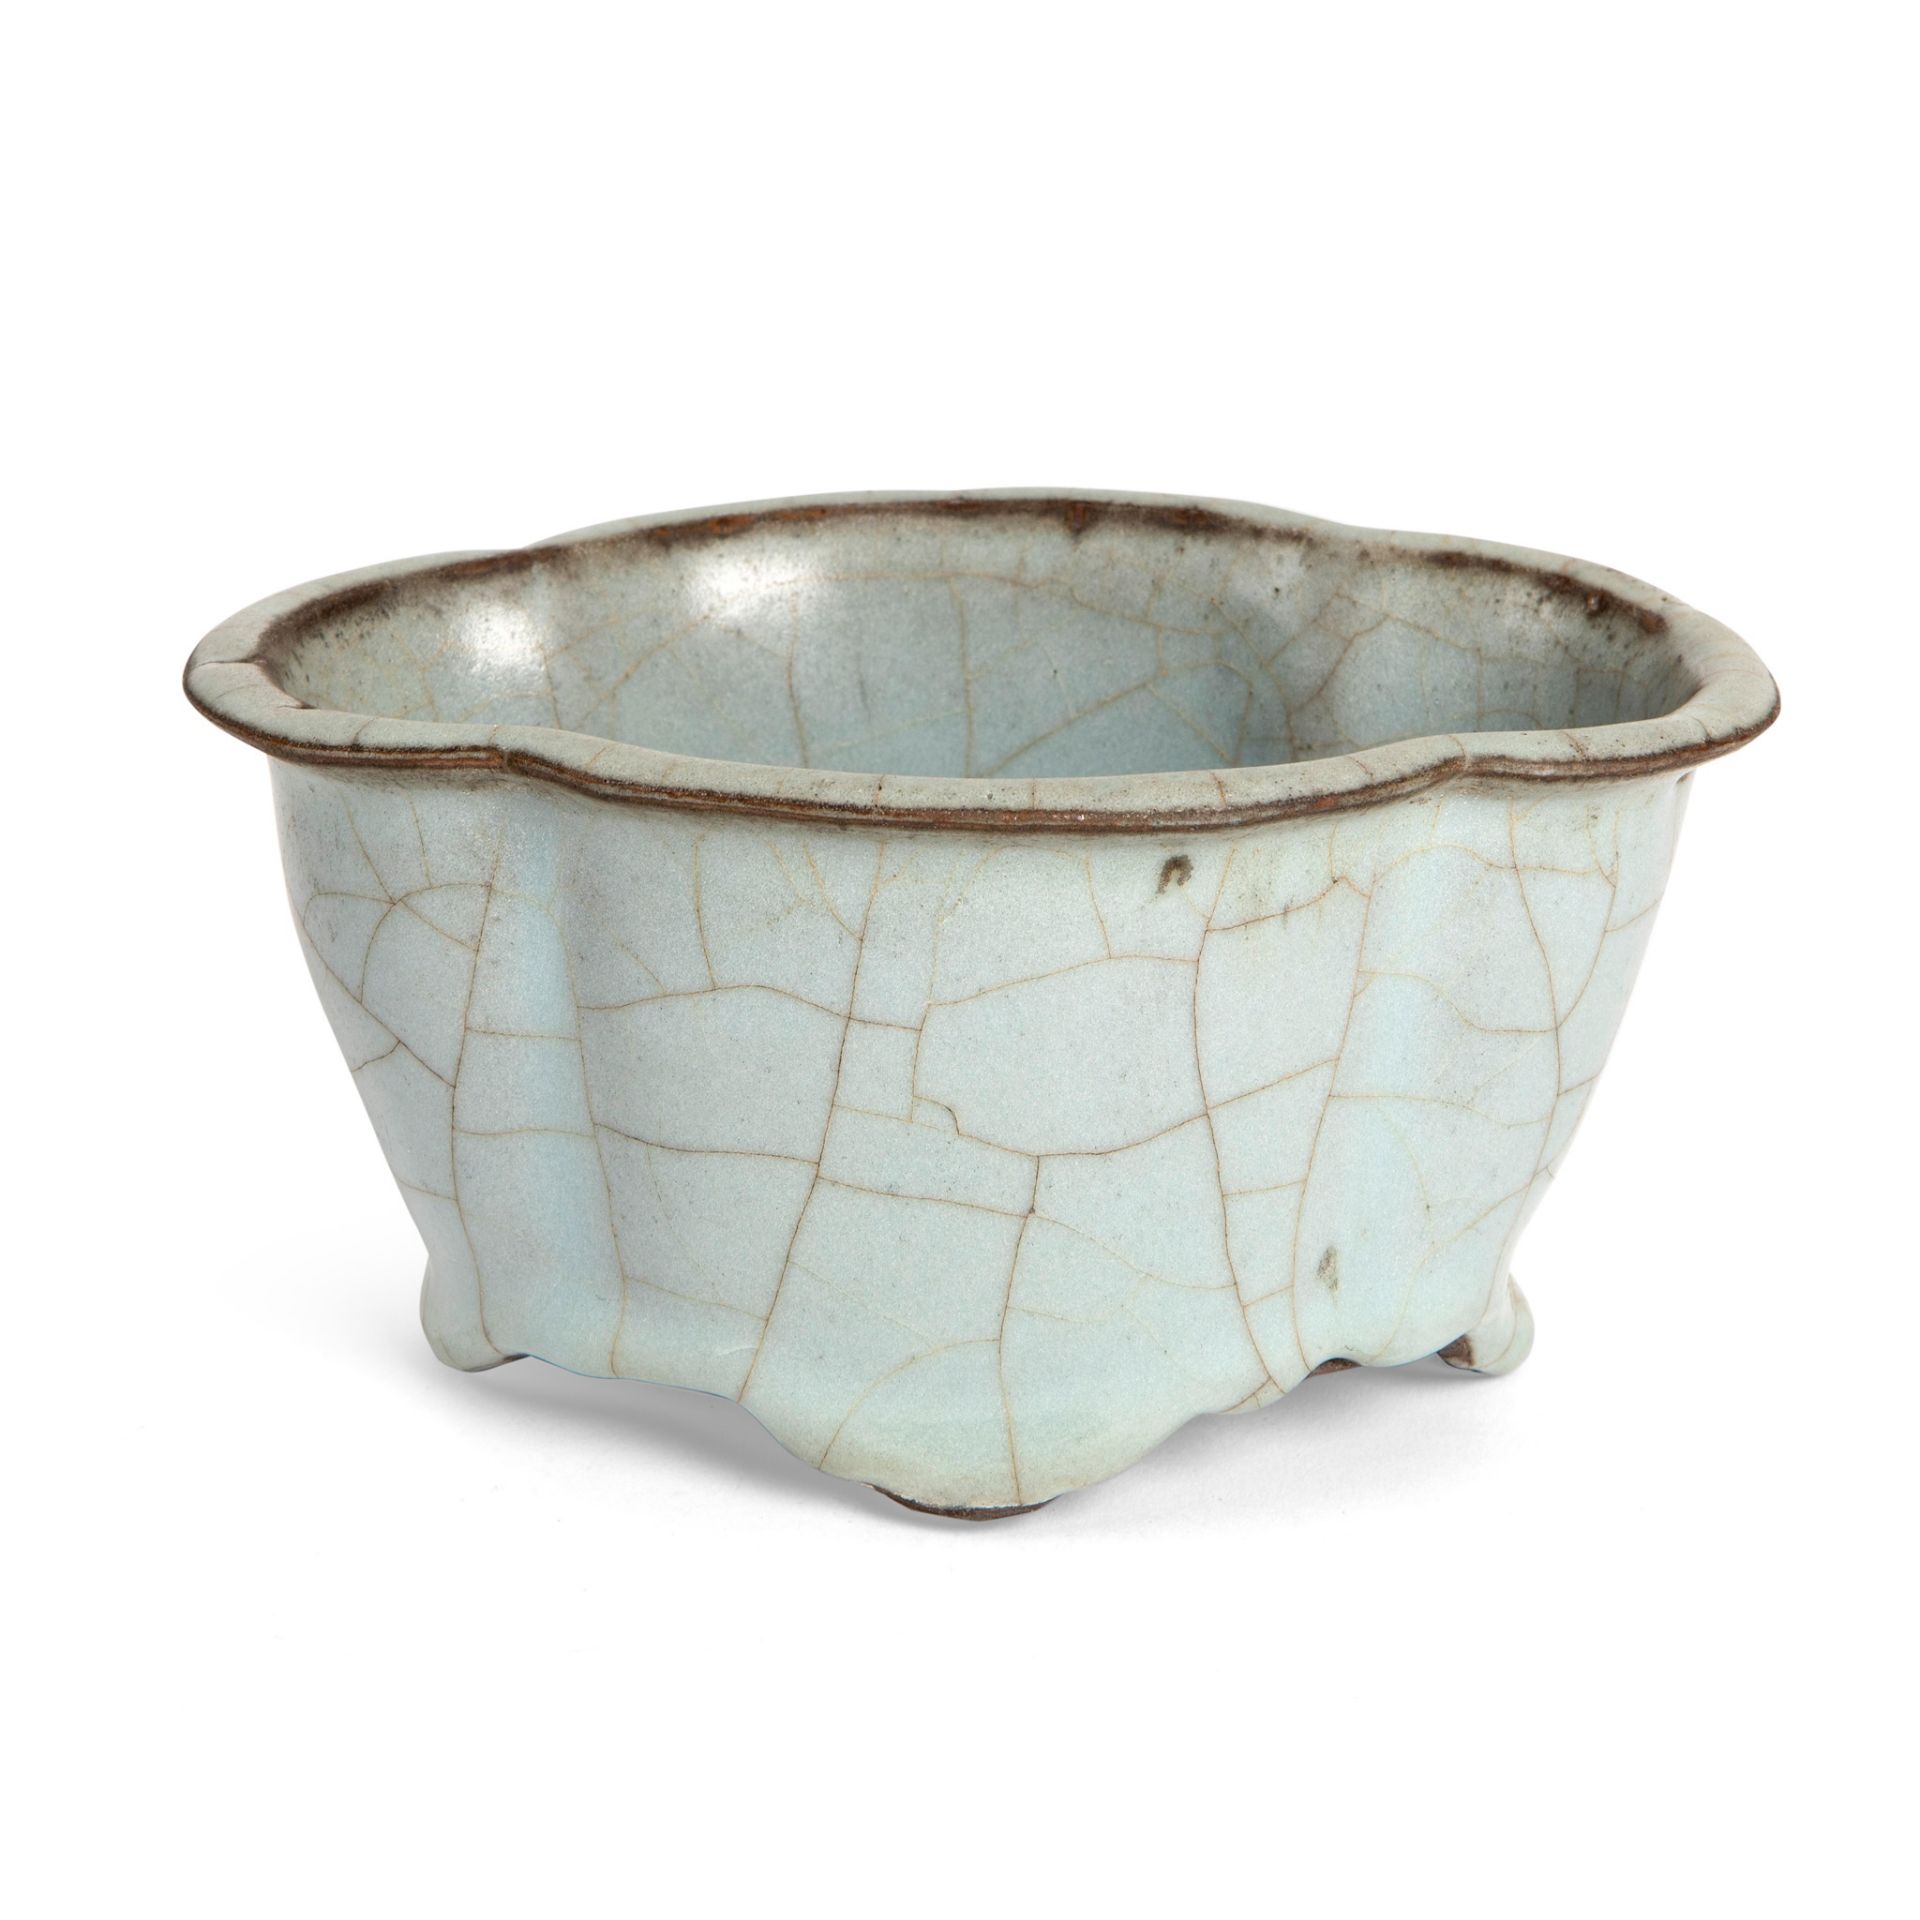 GE-TYPE CRACKLE-GLAZED LOBED WASHER POSSIBLY YUAN TO MING DYNASTY